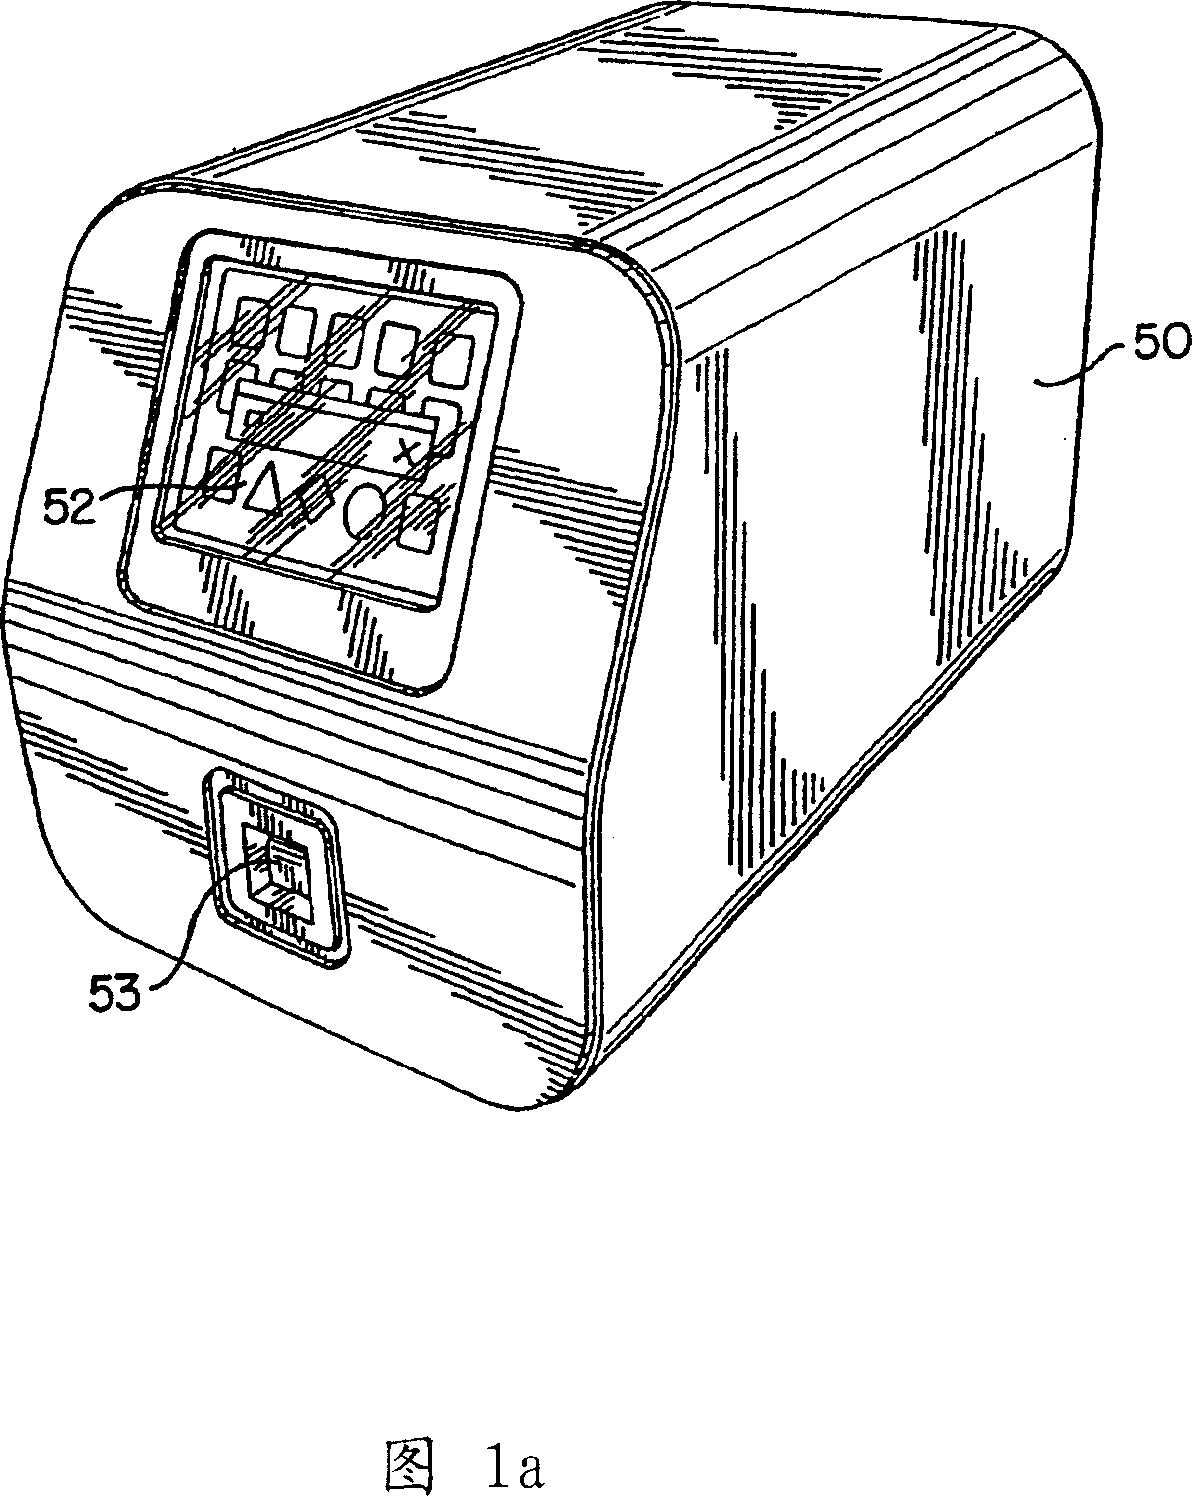 Nanoparticle imaging system and method